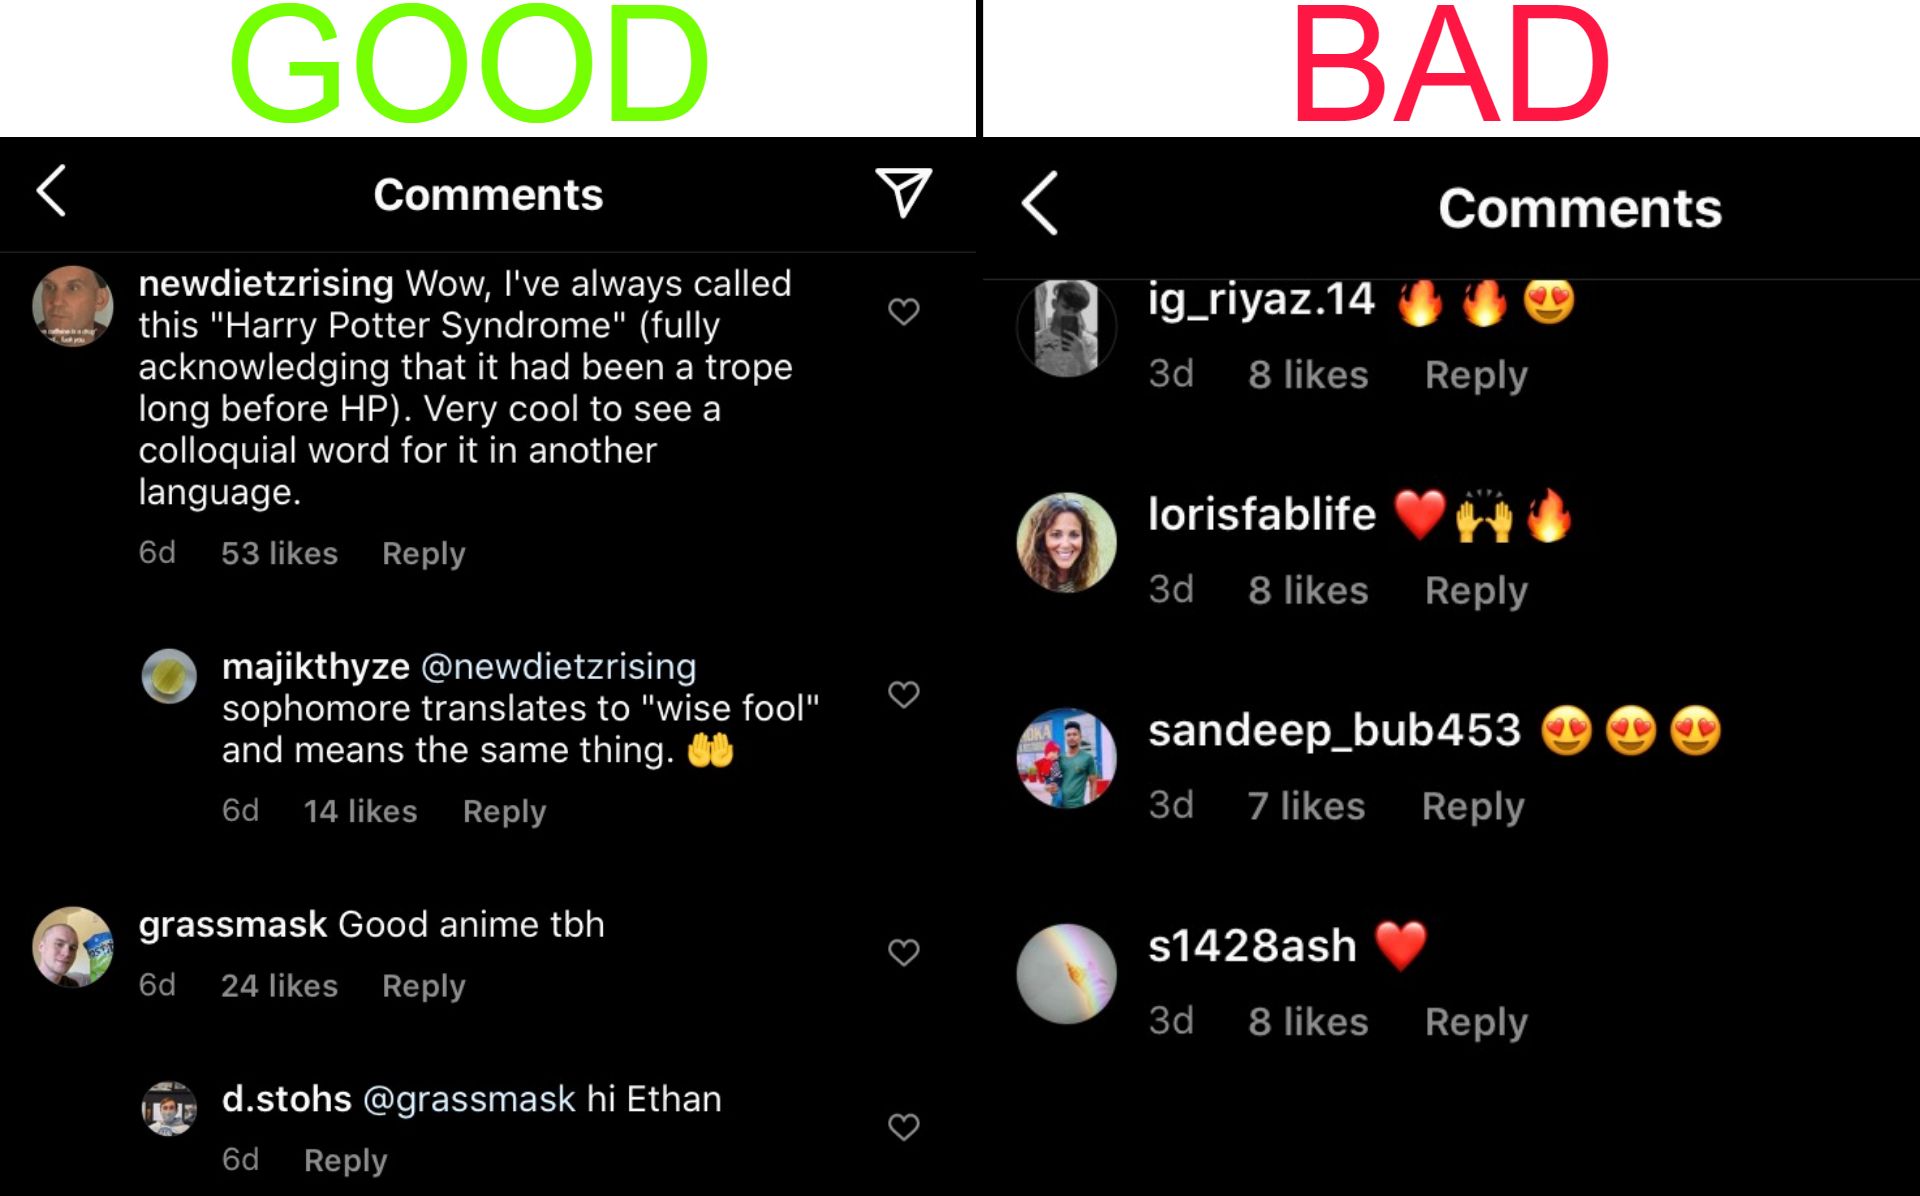 Two different types of Instagram comment sections